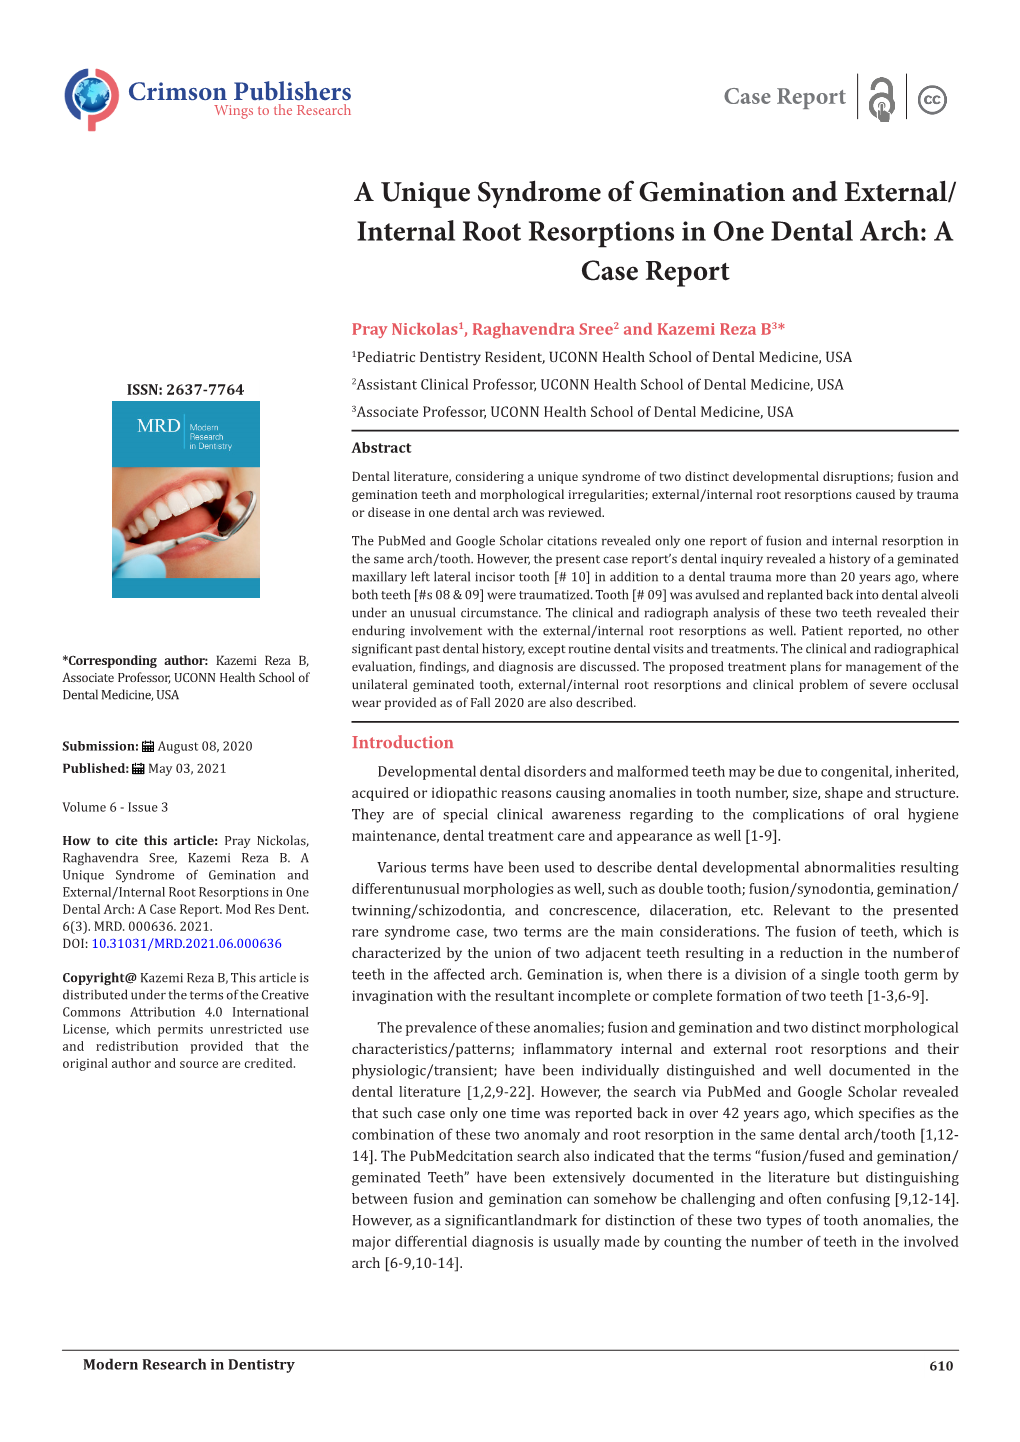 A Unique Syndrome of Gemination and External/ Internal Root Resorptions in One Dental Arch: a Case Report